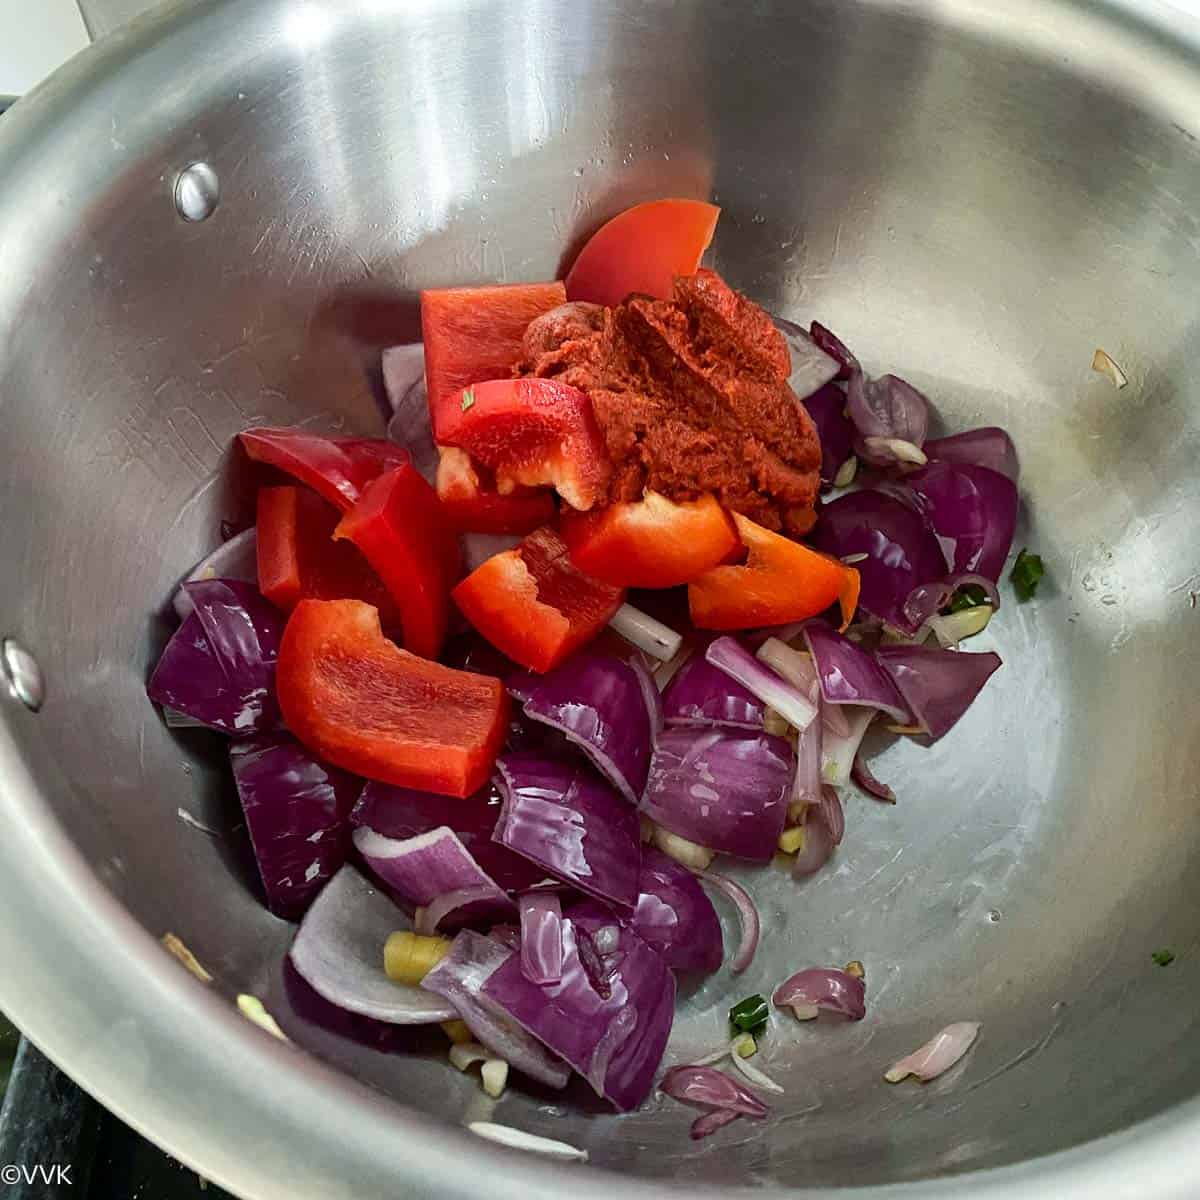 sauteing the onions and bell peppers